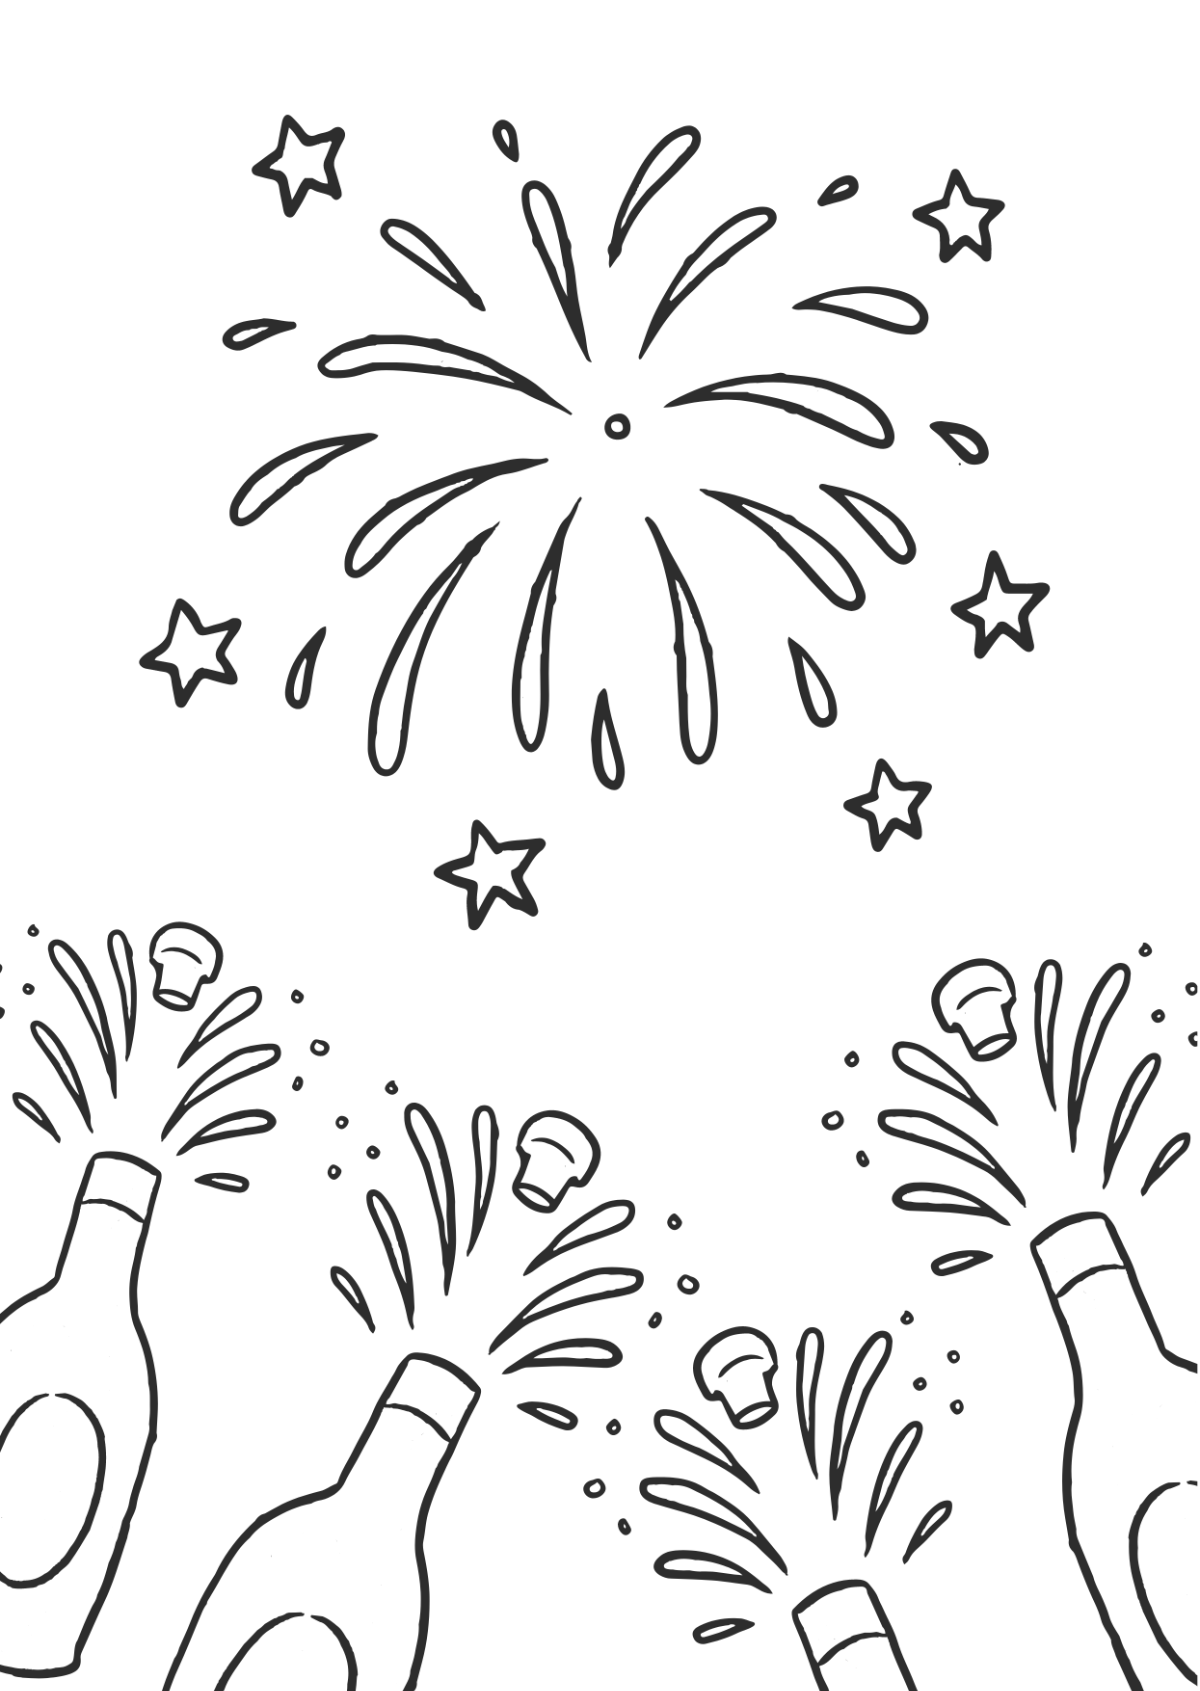 Amazon.com: Tiny Expressions Giant New Years Coloring Poster for Kids - 30  x 72 Inches Jumbo Paper Banner or Table Cover for School Parties or Events  : Toys & Games